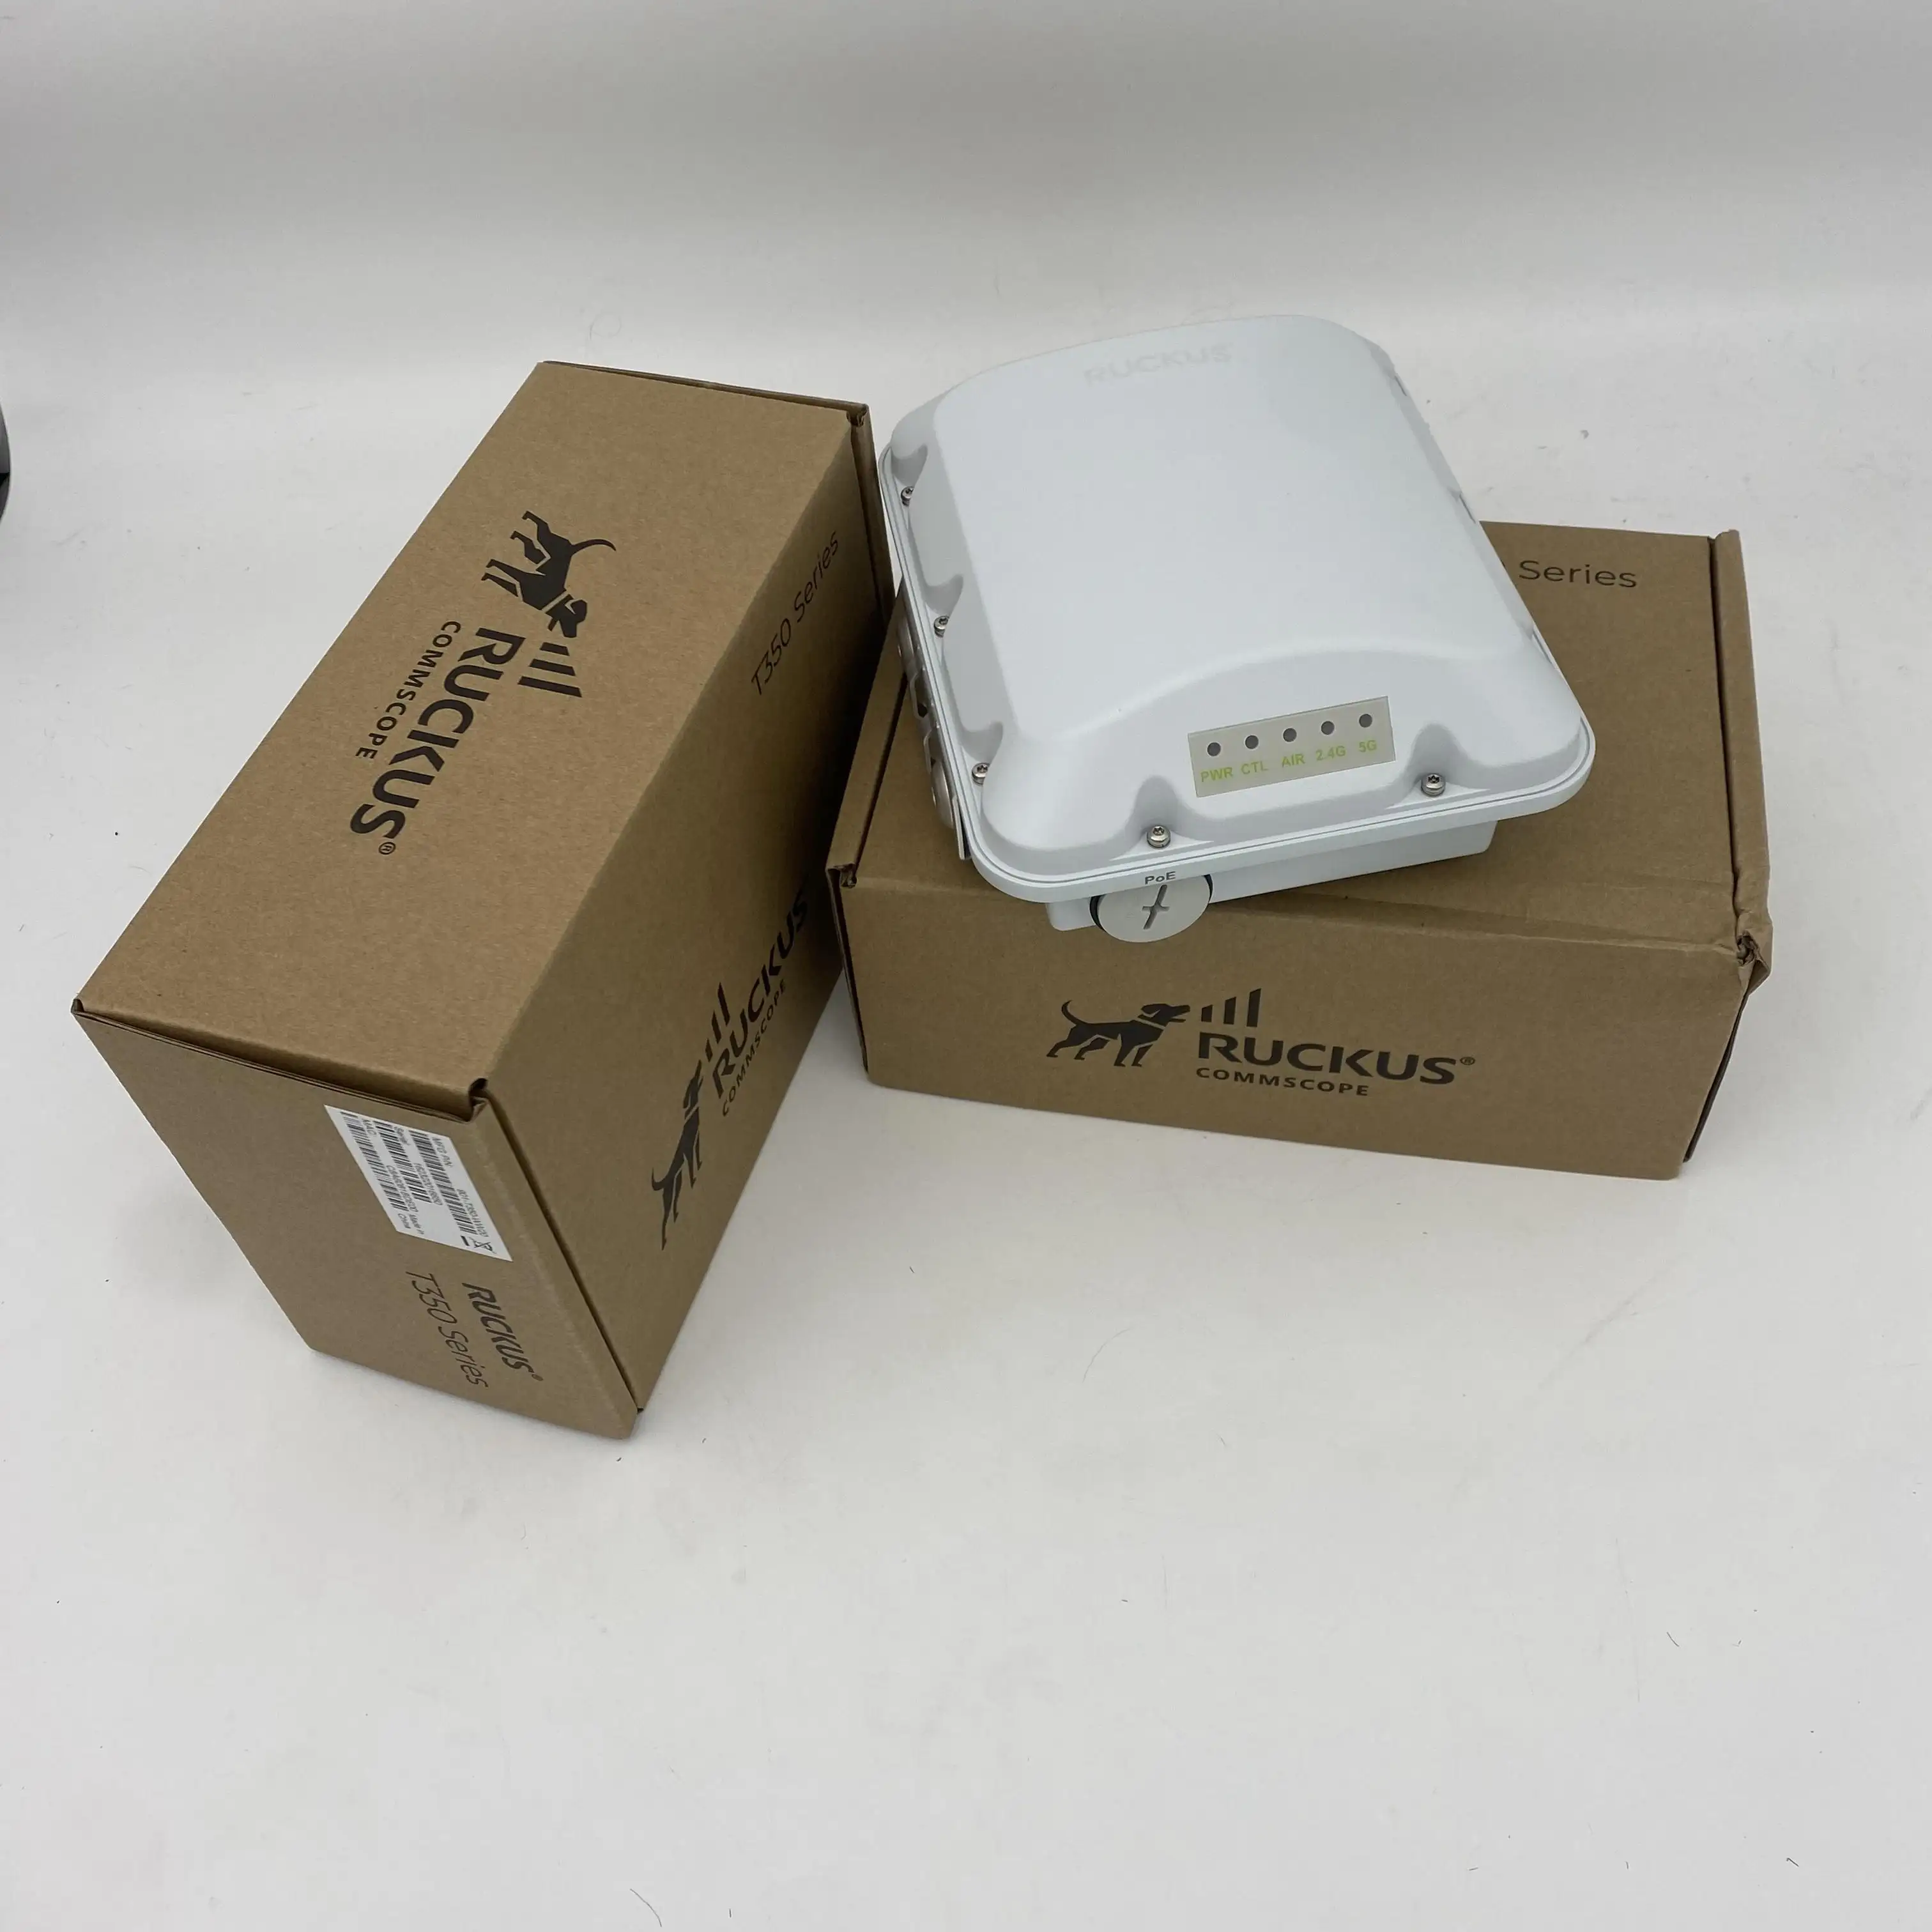 Original Ruckus T310 Outdoor Wireless Router Access Point 901-T310-WW51 with Good Price